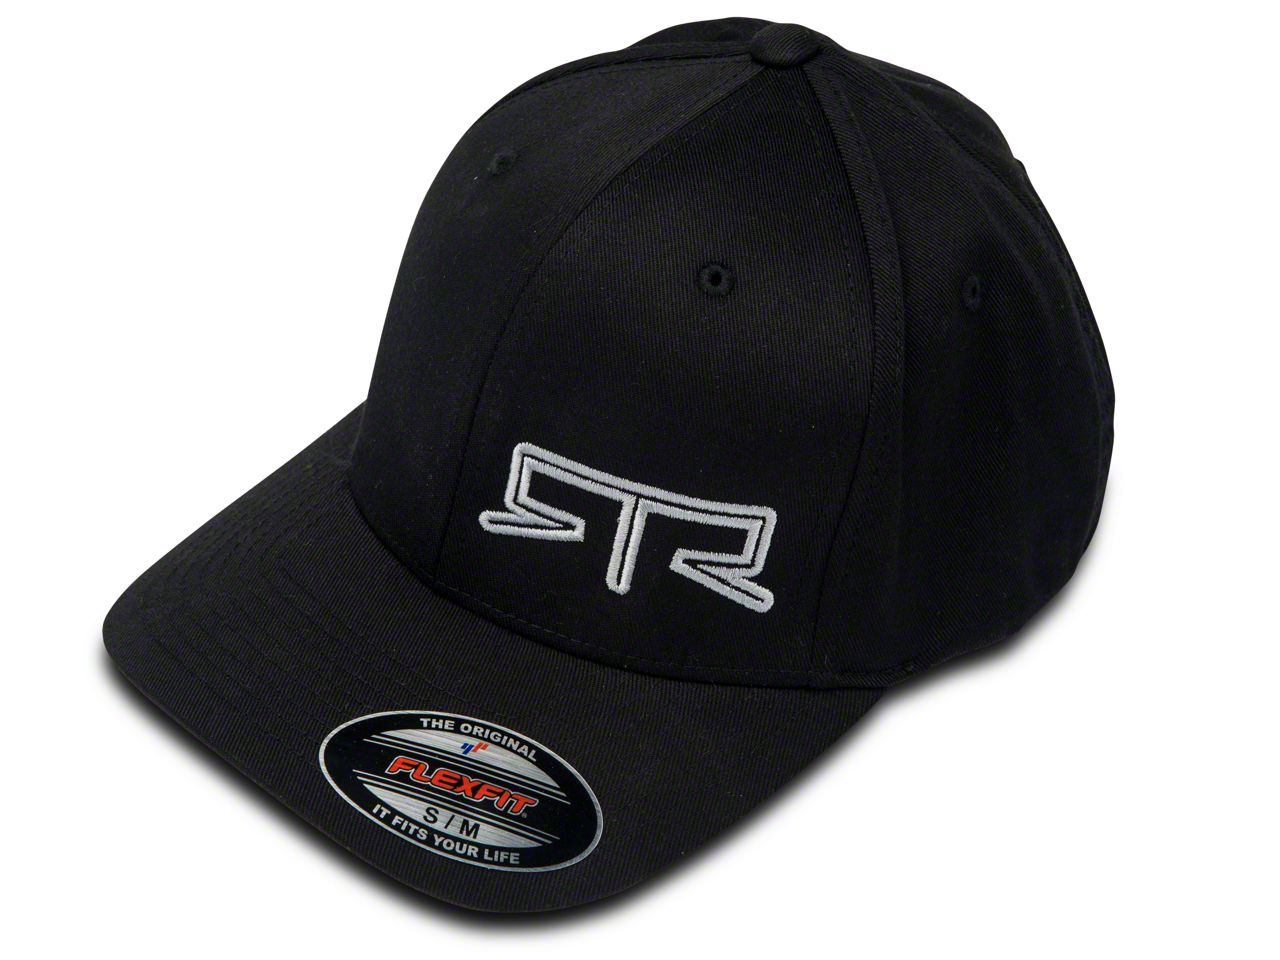 RTR Mustang Flex-Fit Hat - Black 383808 - Free Shipping